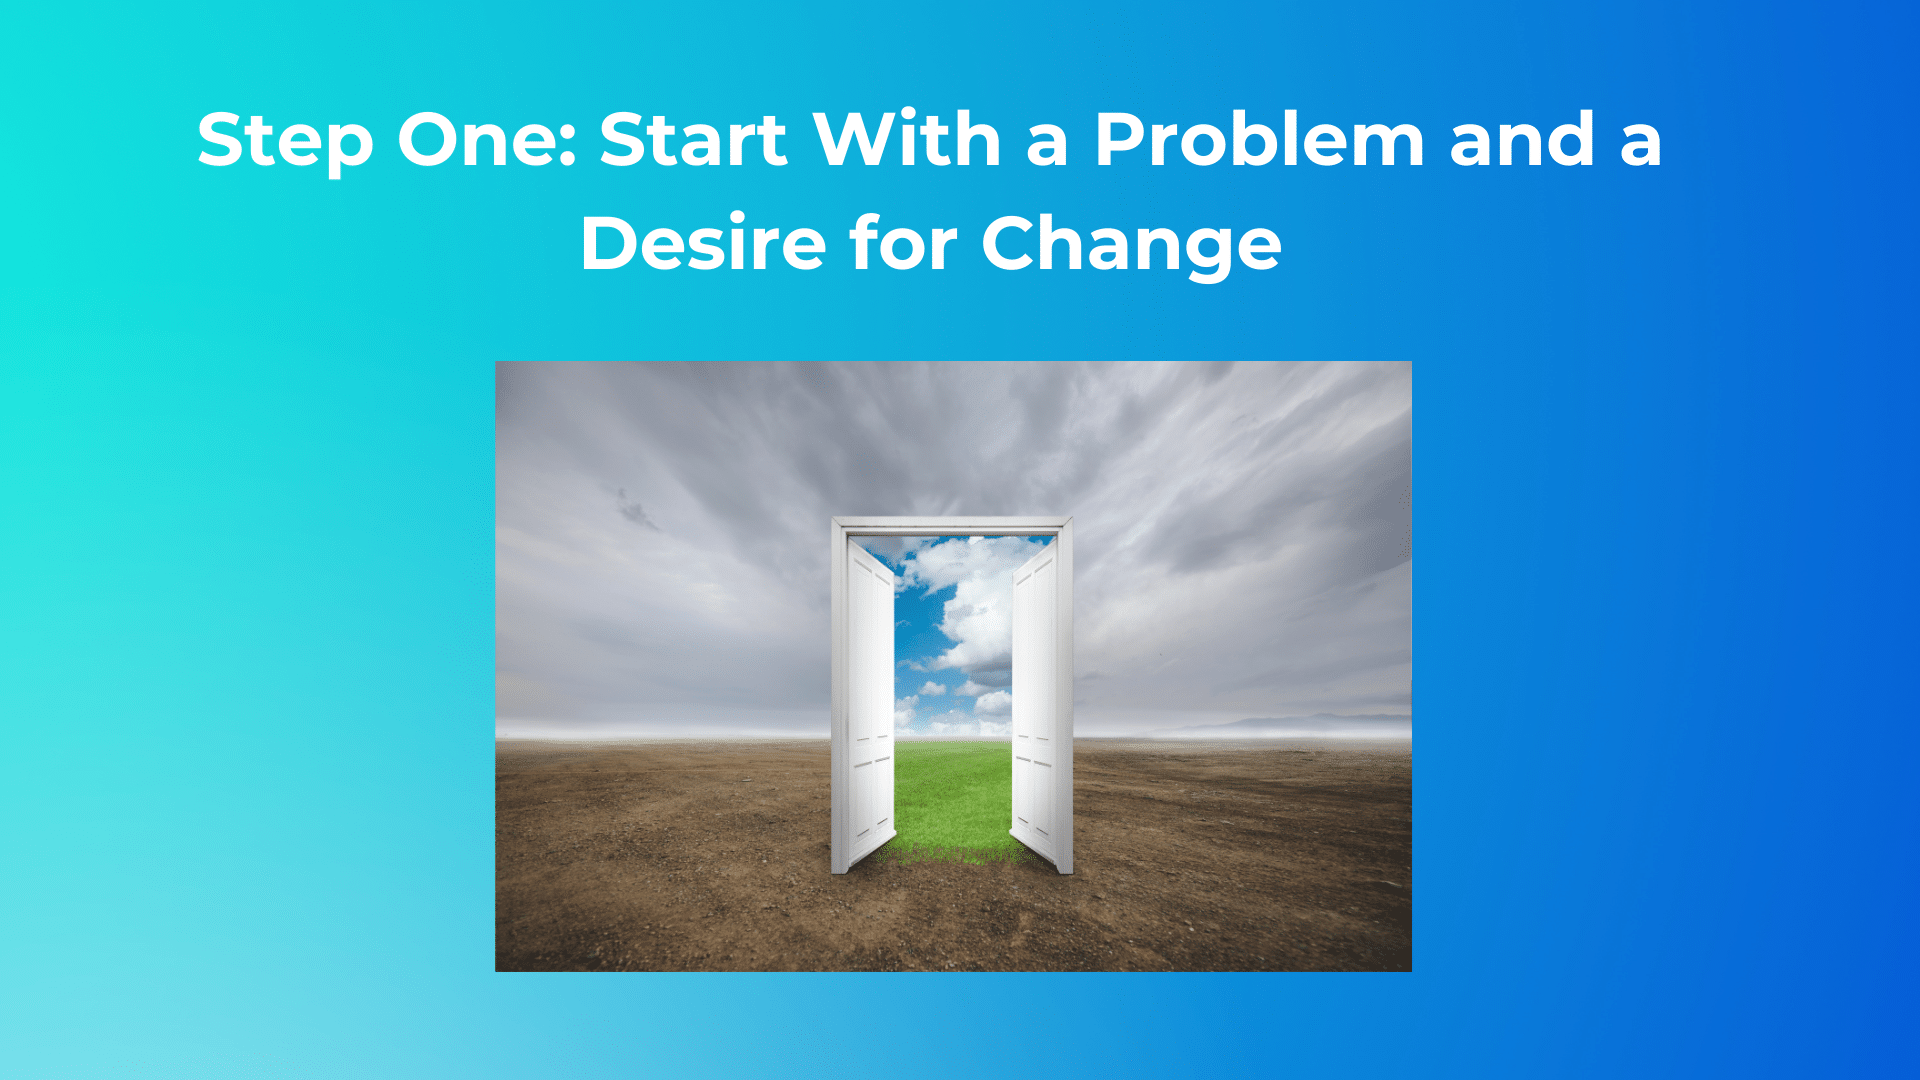 STEP ONE: START WITH A PROBLEM AND A DESIRE FOR CHANGE